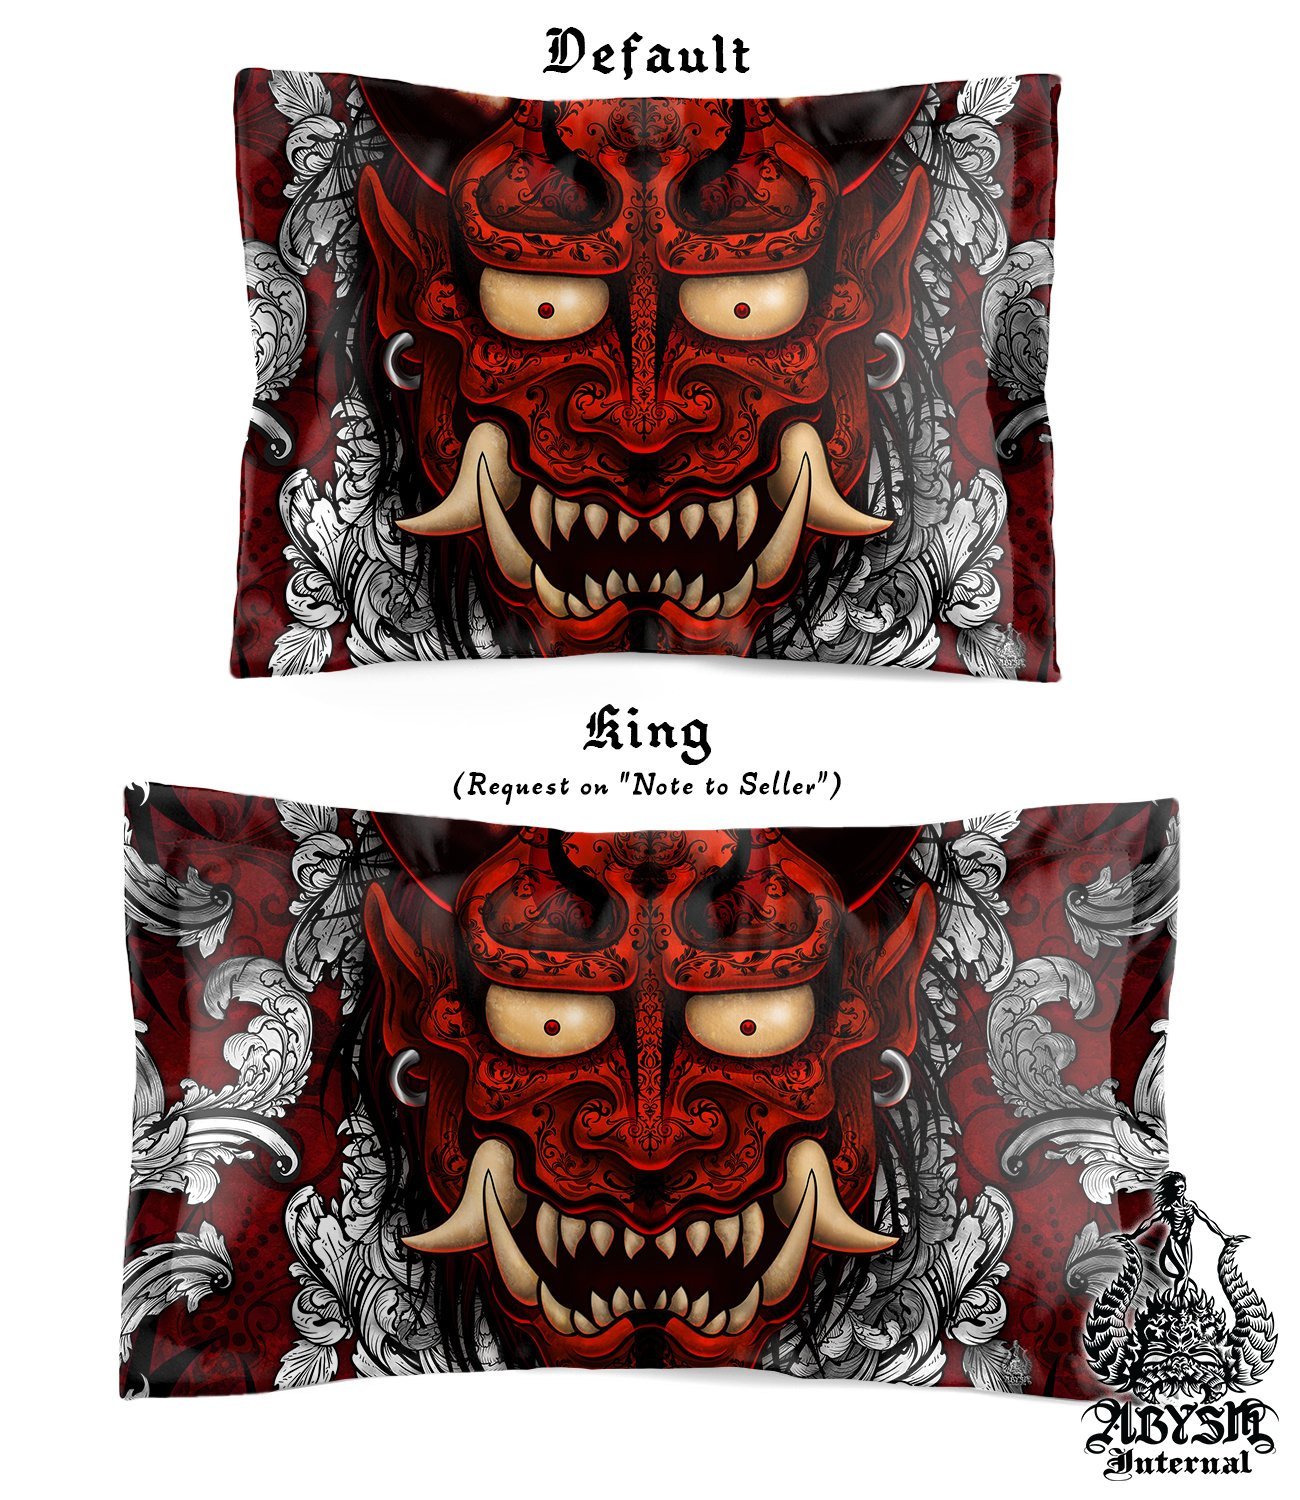 Oni Bedding Set, Comforter and Duvet, Anime Bed Cover, Alternative Bedroom Decor, King, Queen and Twin Size - Silver & Red, Japanese Demon - Abysm Internal